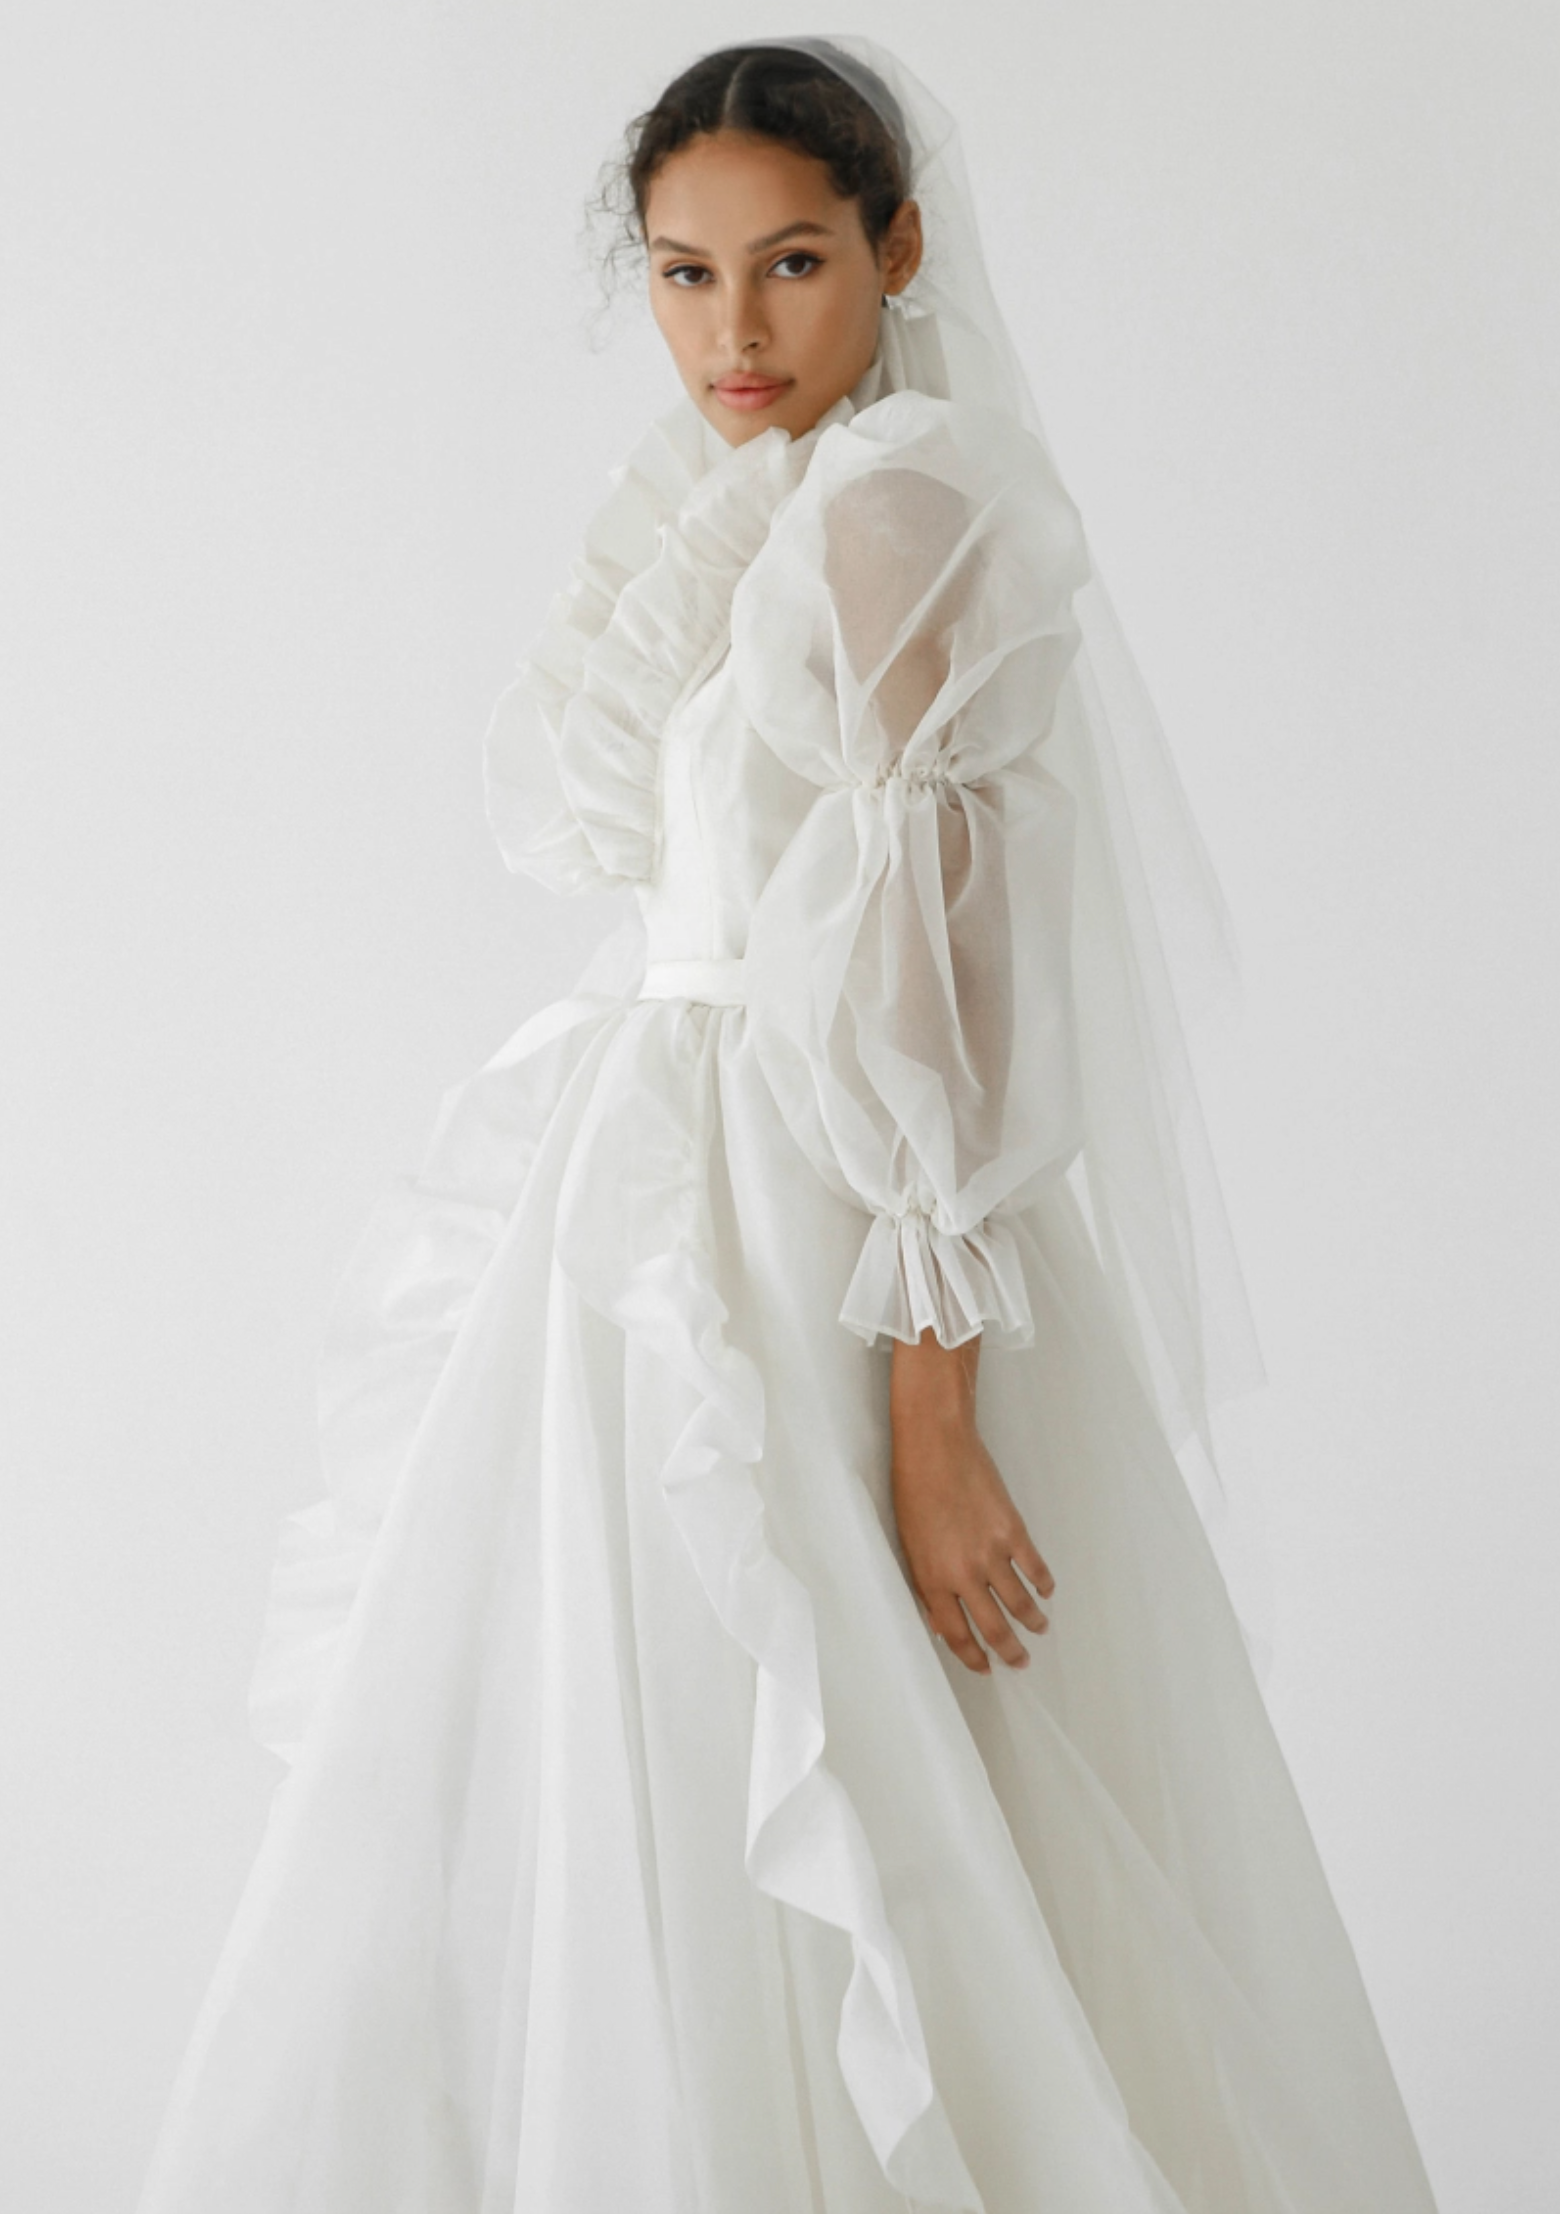 A sheer, long-sleeve flowy wedding gown designed by Odylyne the Ceremony for the spring and summer 2023.